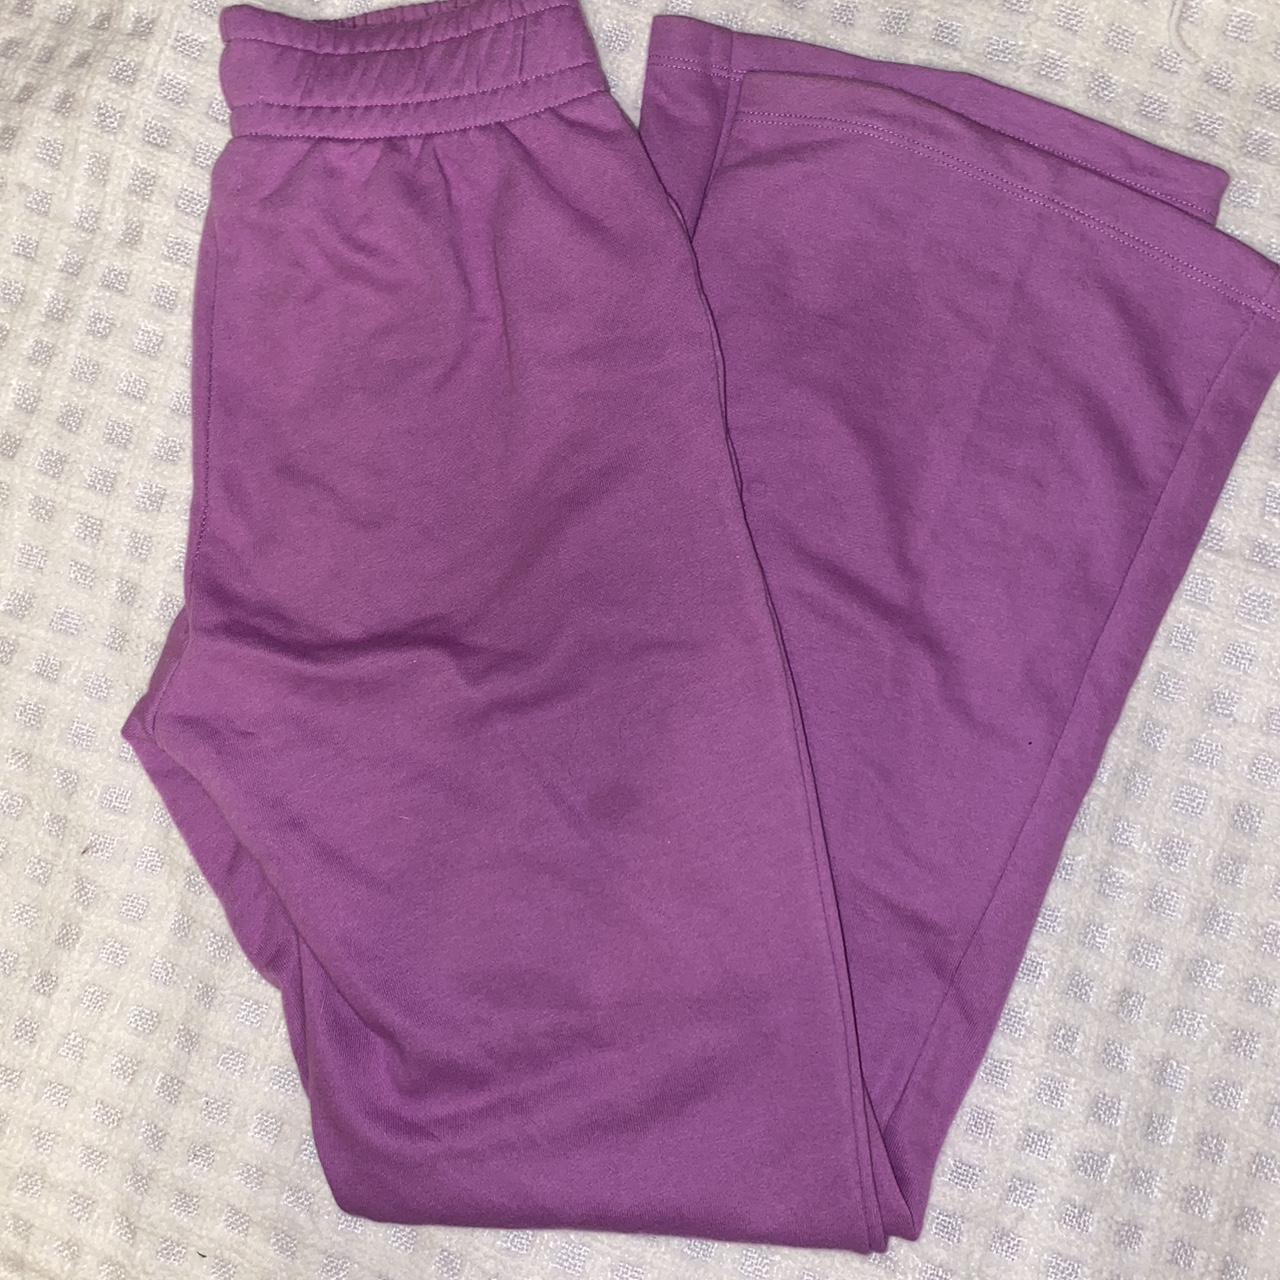 Wild fable flare pants - Depop